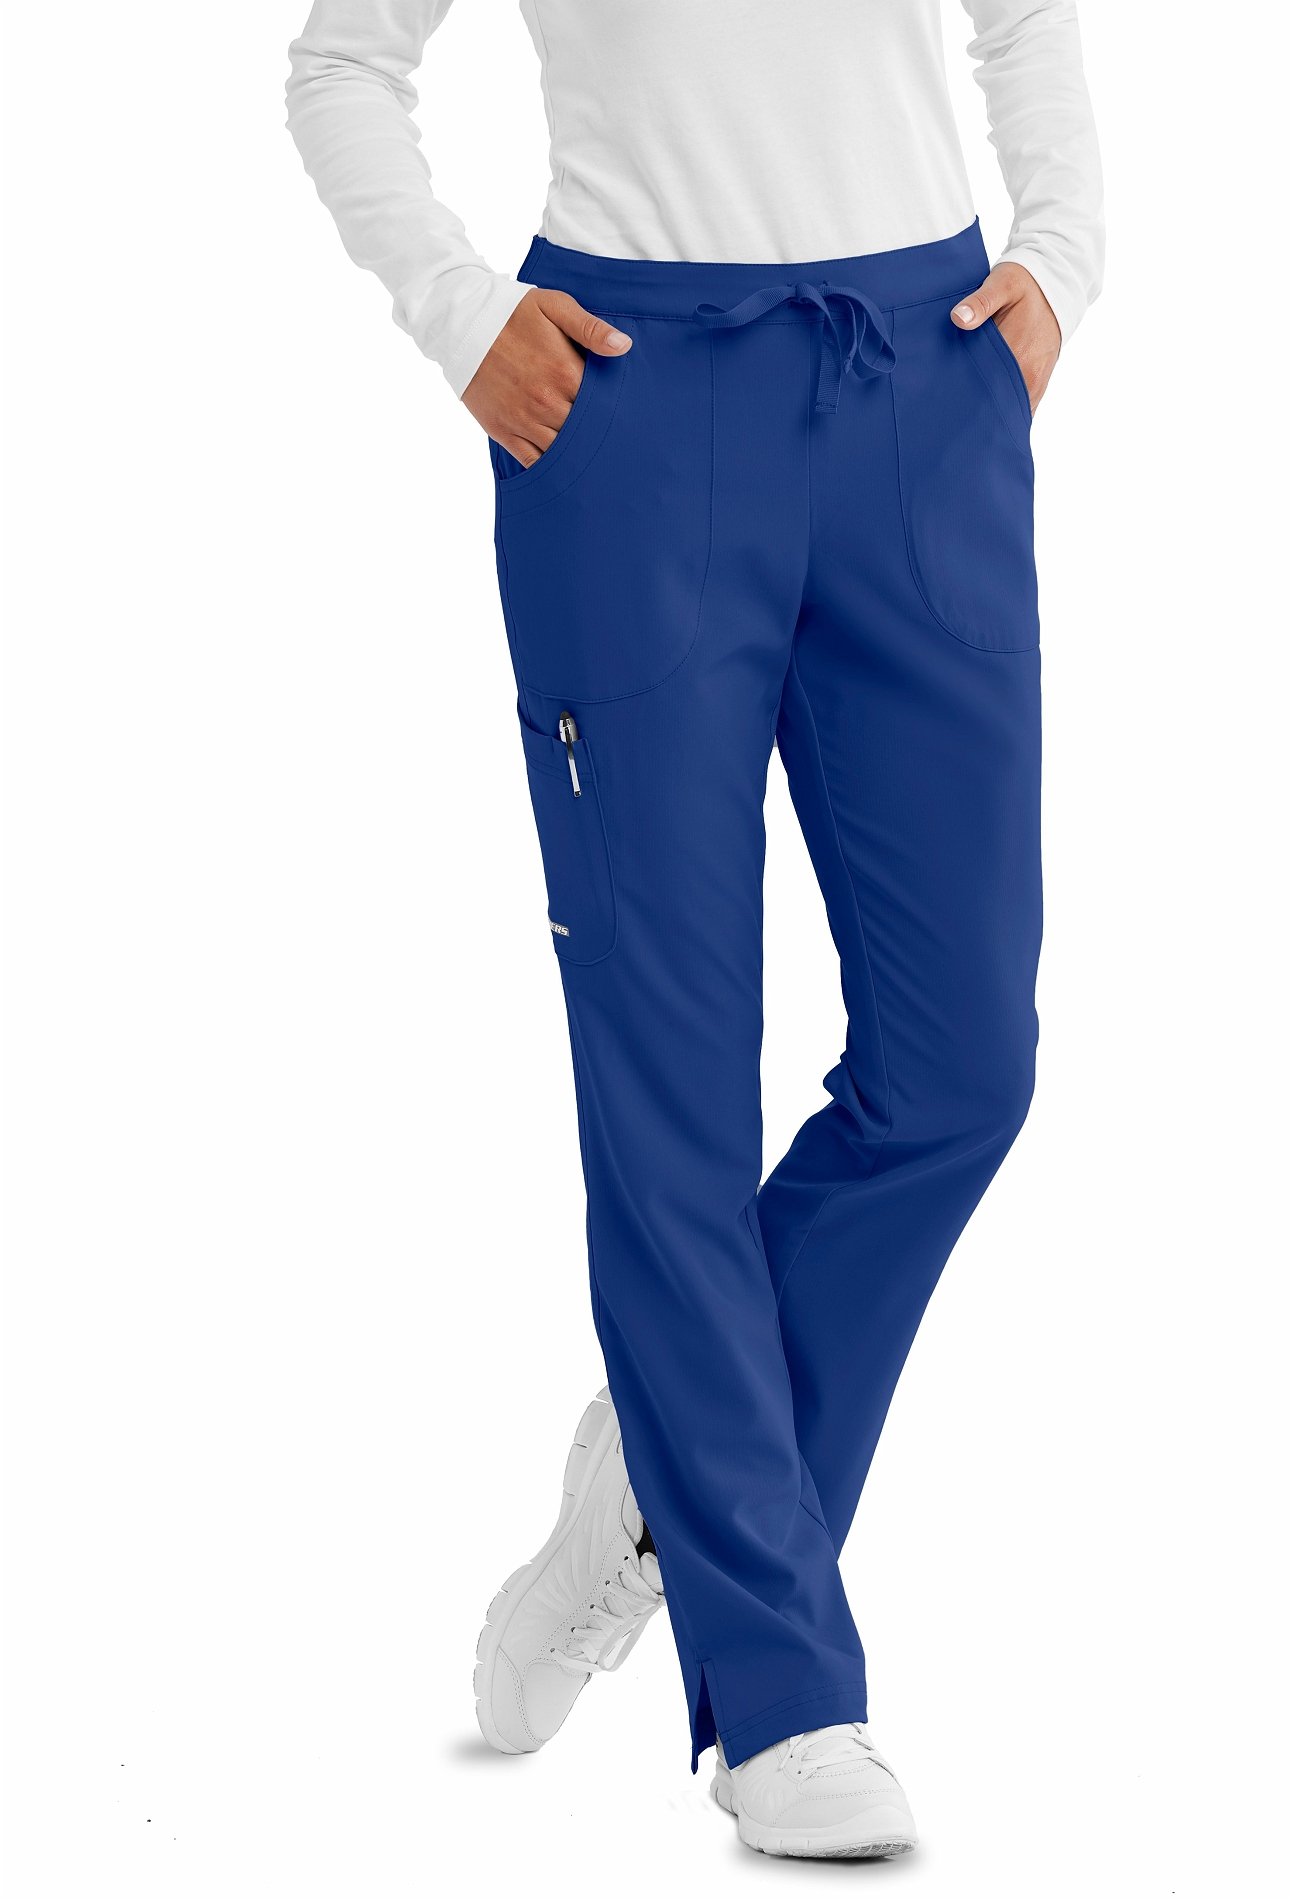 Skechers by Barco Women\'s Reliance Cargo Drawstring Scrub Pants-SK201 |  Medical Scrubs Collection